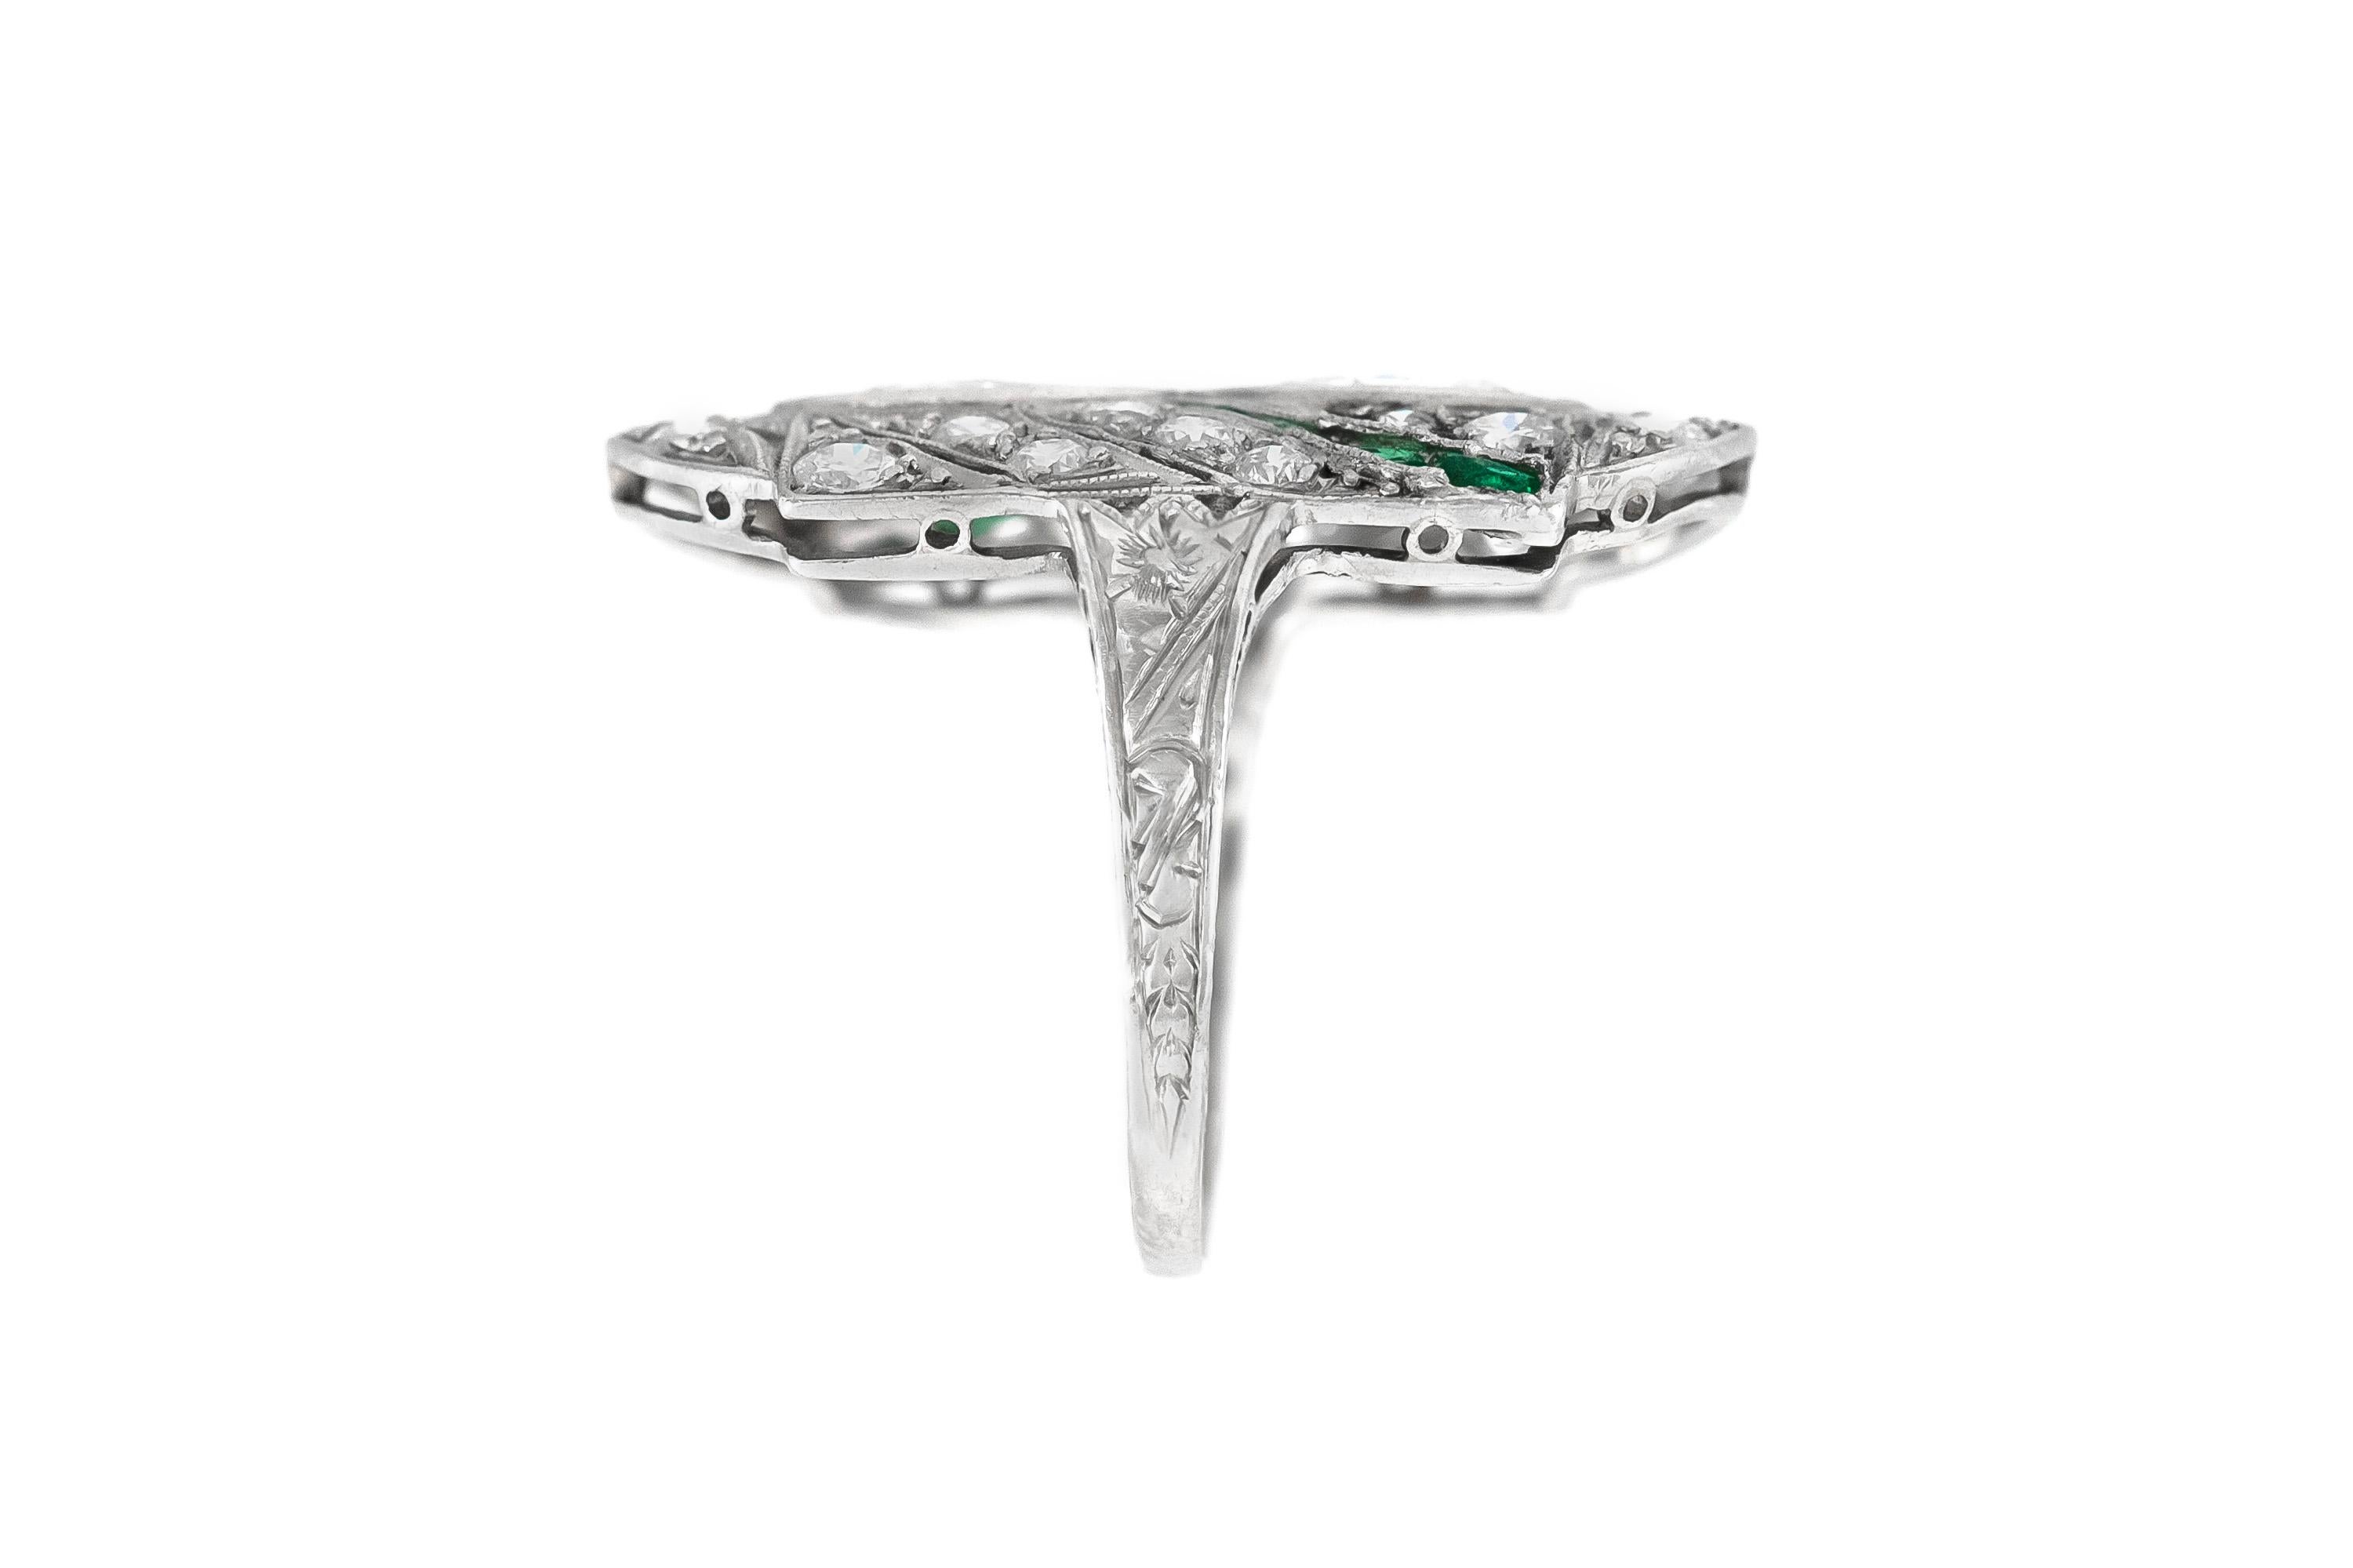 The ring is finely crafted in platinum with emerald and diamonds weighing approximately total of 1.50 carat.
Size 3.50 (easy to resize)
Circa 1930.
